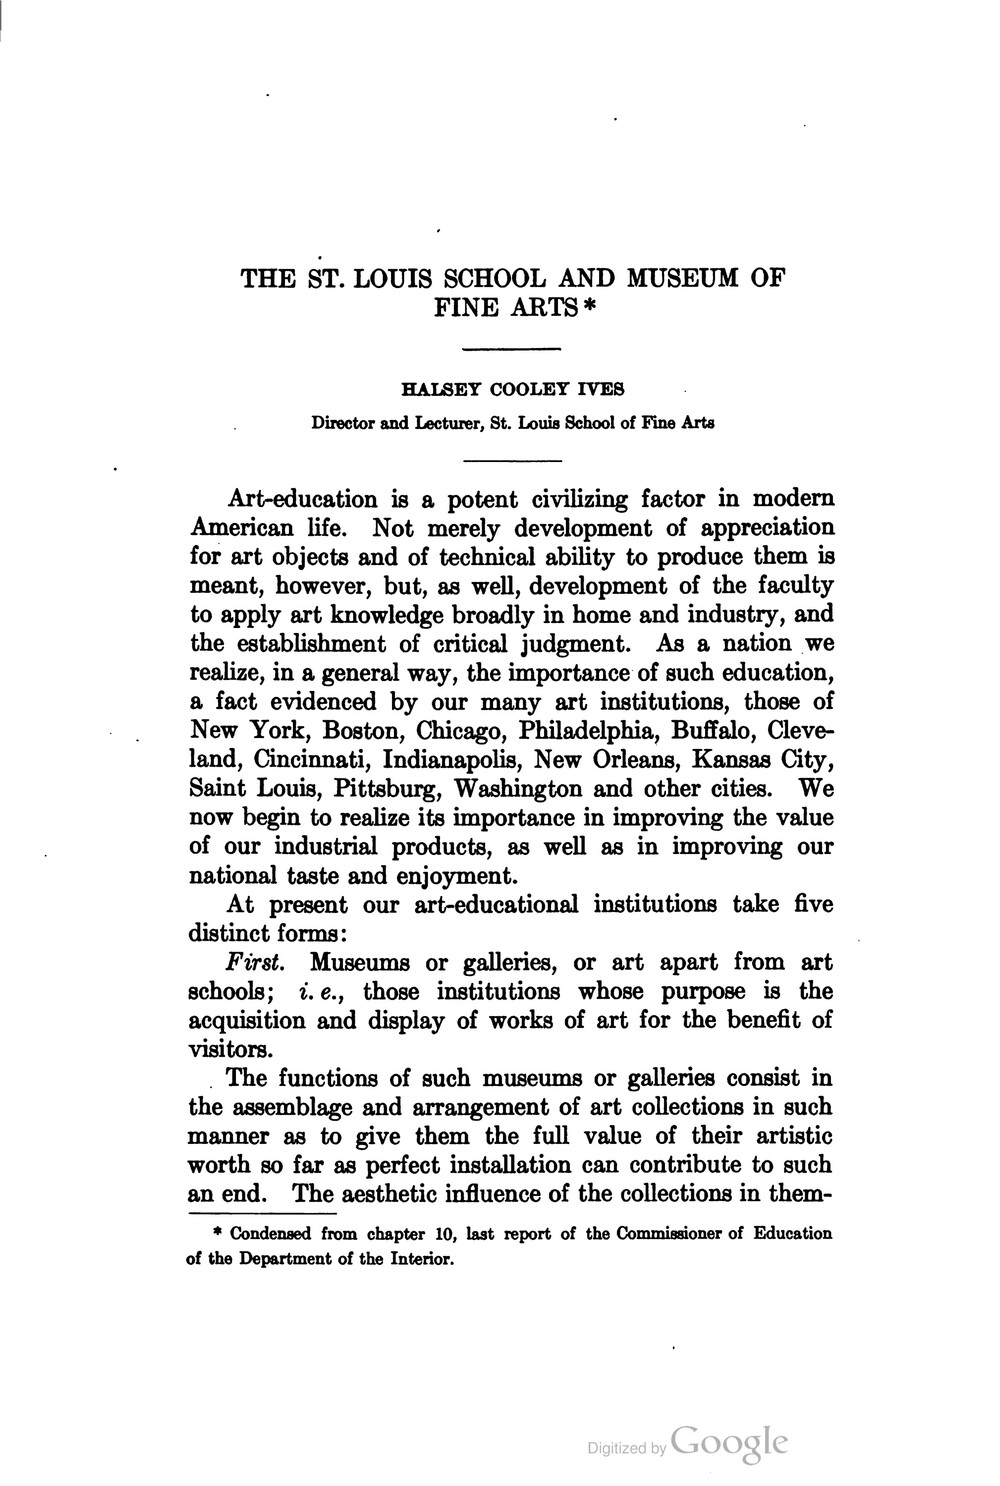 The first page of "The St. Louis School and Museum of Fine Arts"